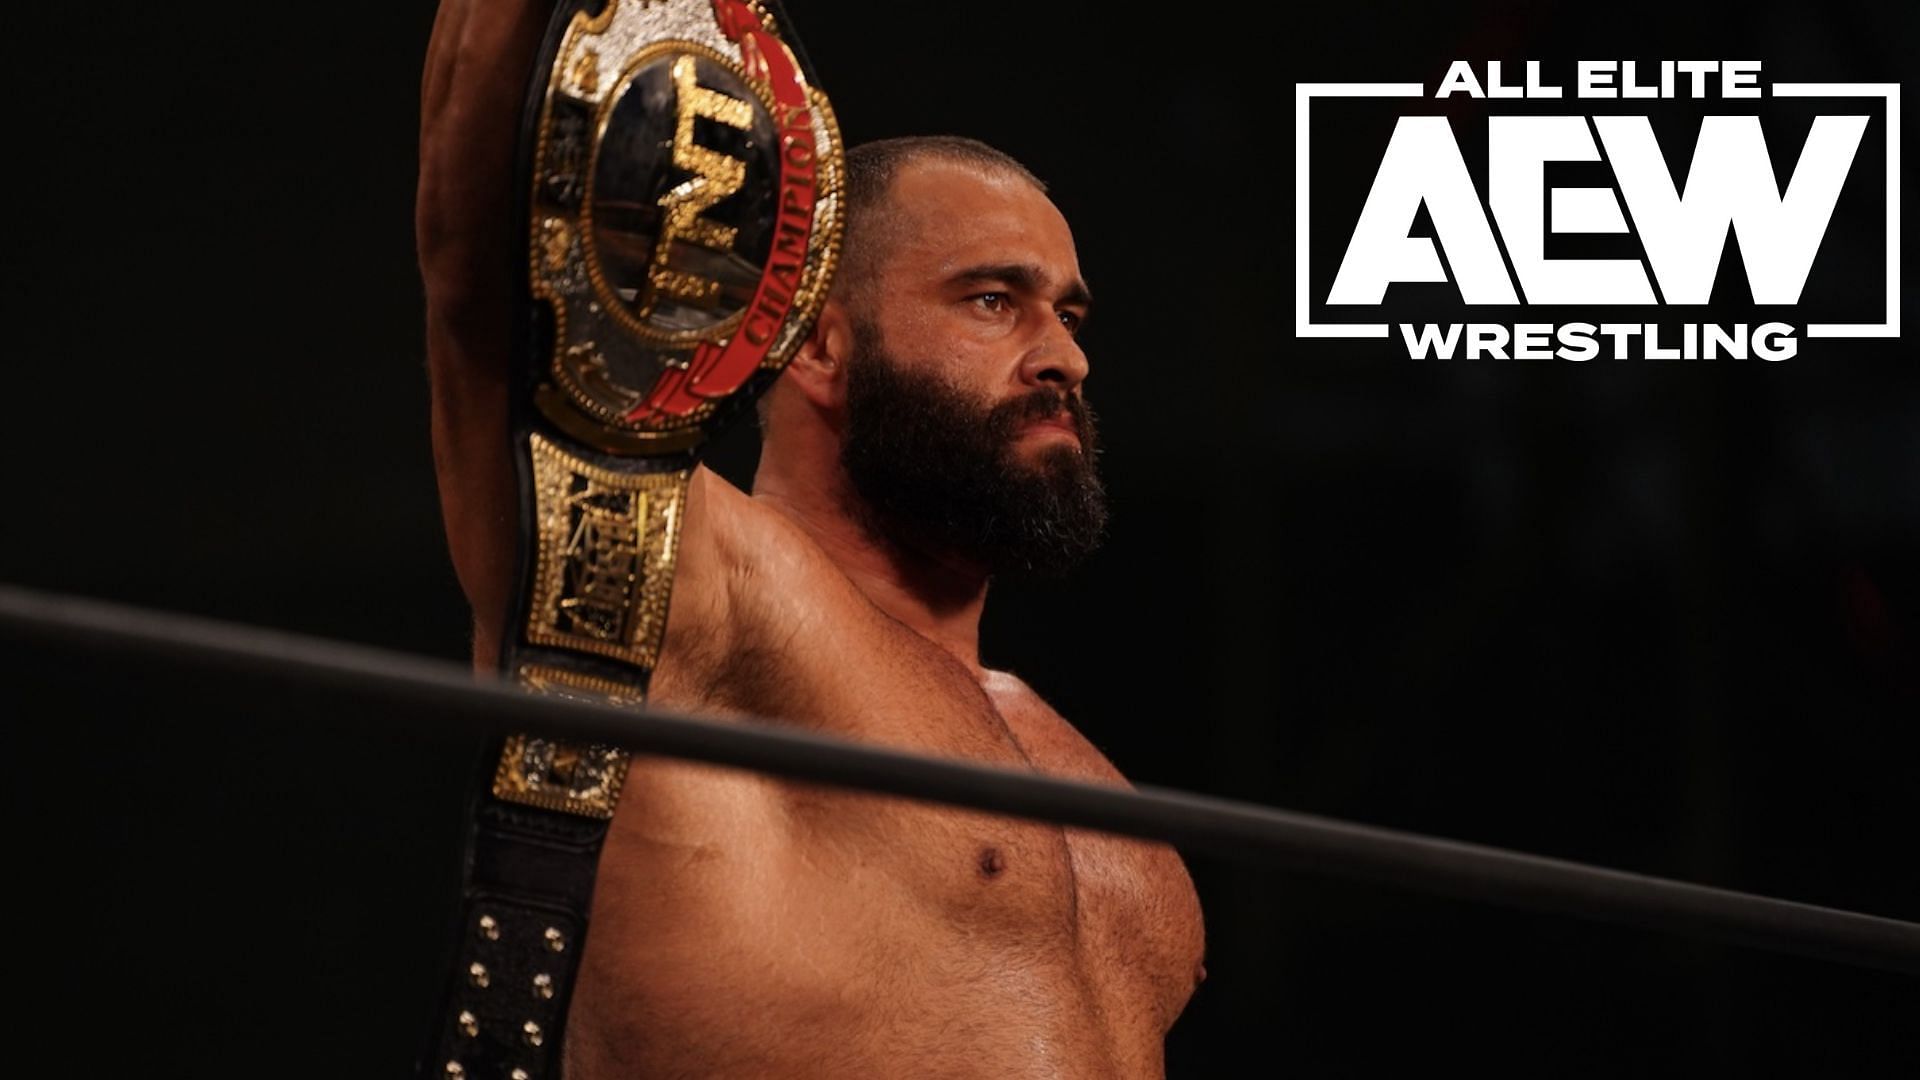 Will The Redeemer return to AEW before the year ends?